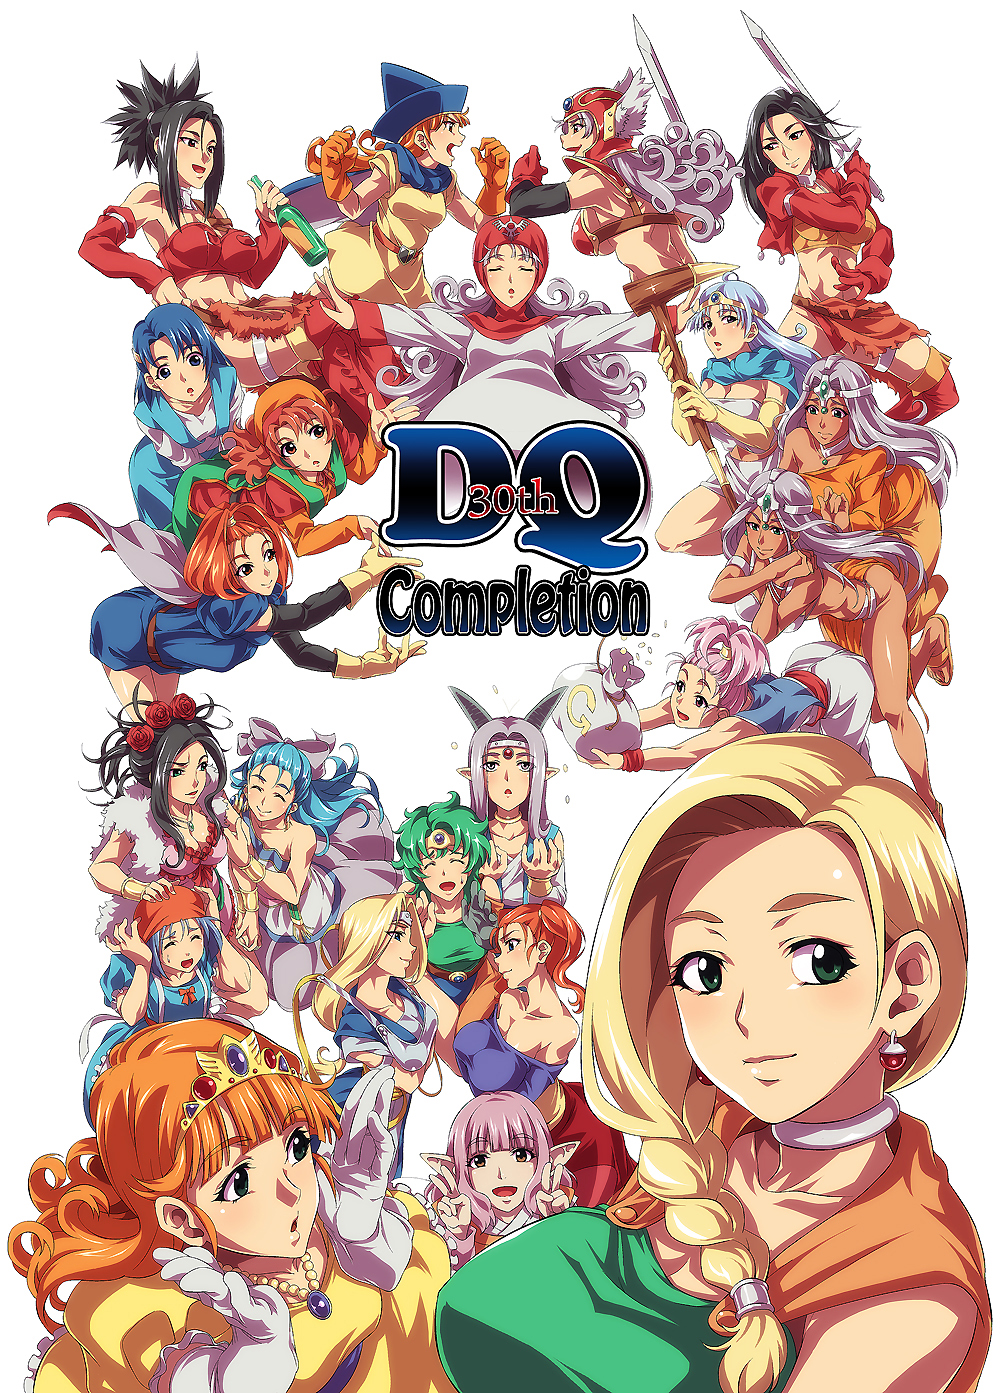 1girl aira_(dq7) alena_(dq4) barbara bianca blue_eyes breasts curly_hair dragon_quest dragon_quest_ii dragon_quest_iii dragon_quest_iv dragon_quest_v dragon_quest_vi dragon_quest_vii dragon_quest_viii dress green_eyes hat heroine_(dq4) highres hood jessica_albert juvecross long_hair looking_at_viewer maribel_(dq7) medium_breasts open_mouth princess_laura princess_of_moonbrook red_(dq8) redhead short_hair small_breasts smile solo